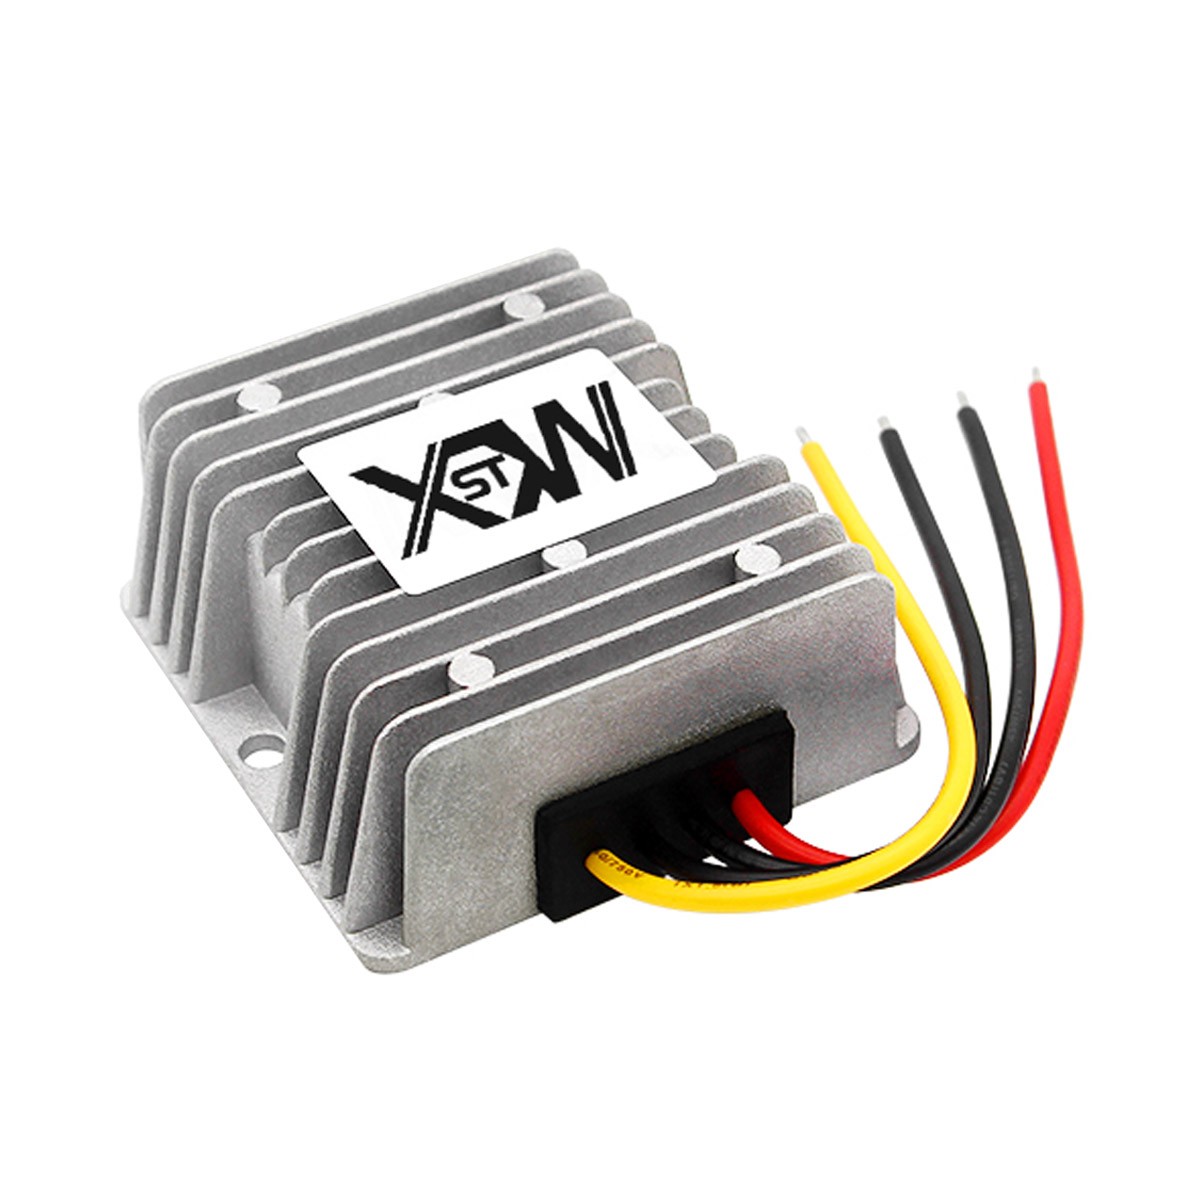 Voltage Adapter Converter 12VDC to 48VDC 5A 240W